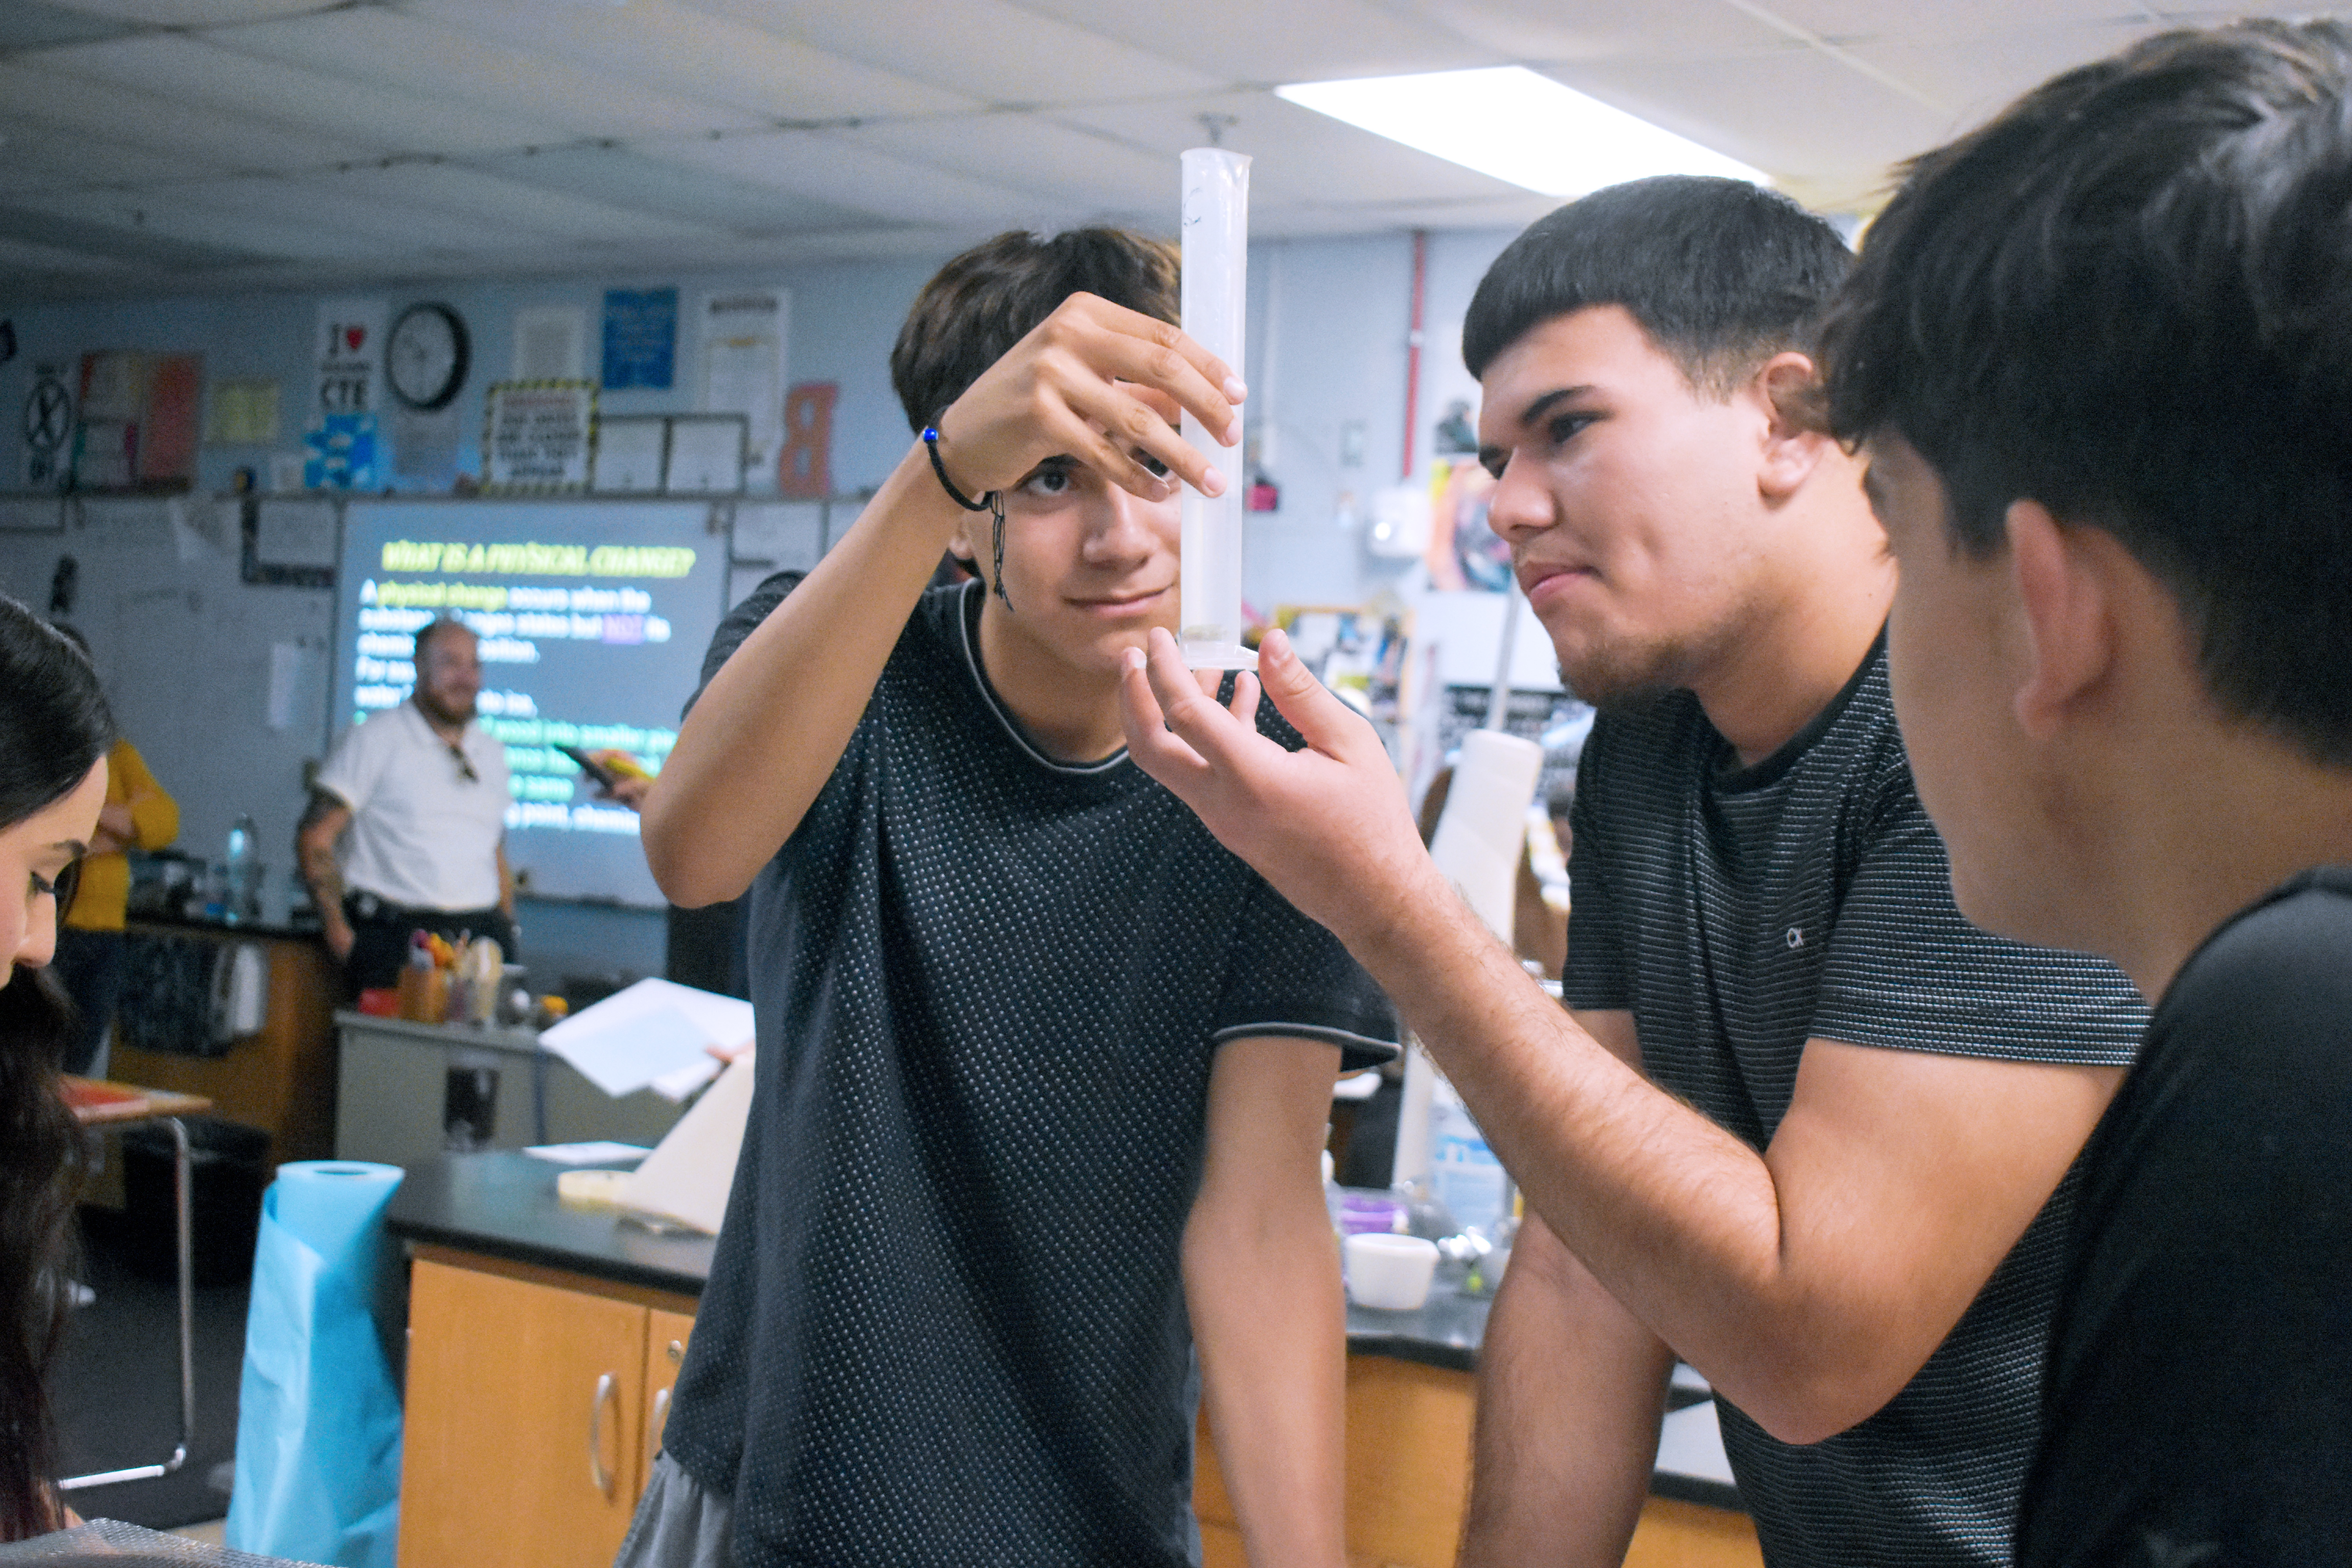 High school students conducting a science experiment in the classroom, focusing intently on a test tube.